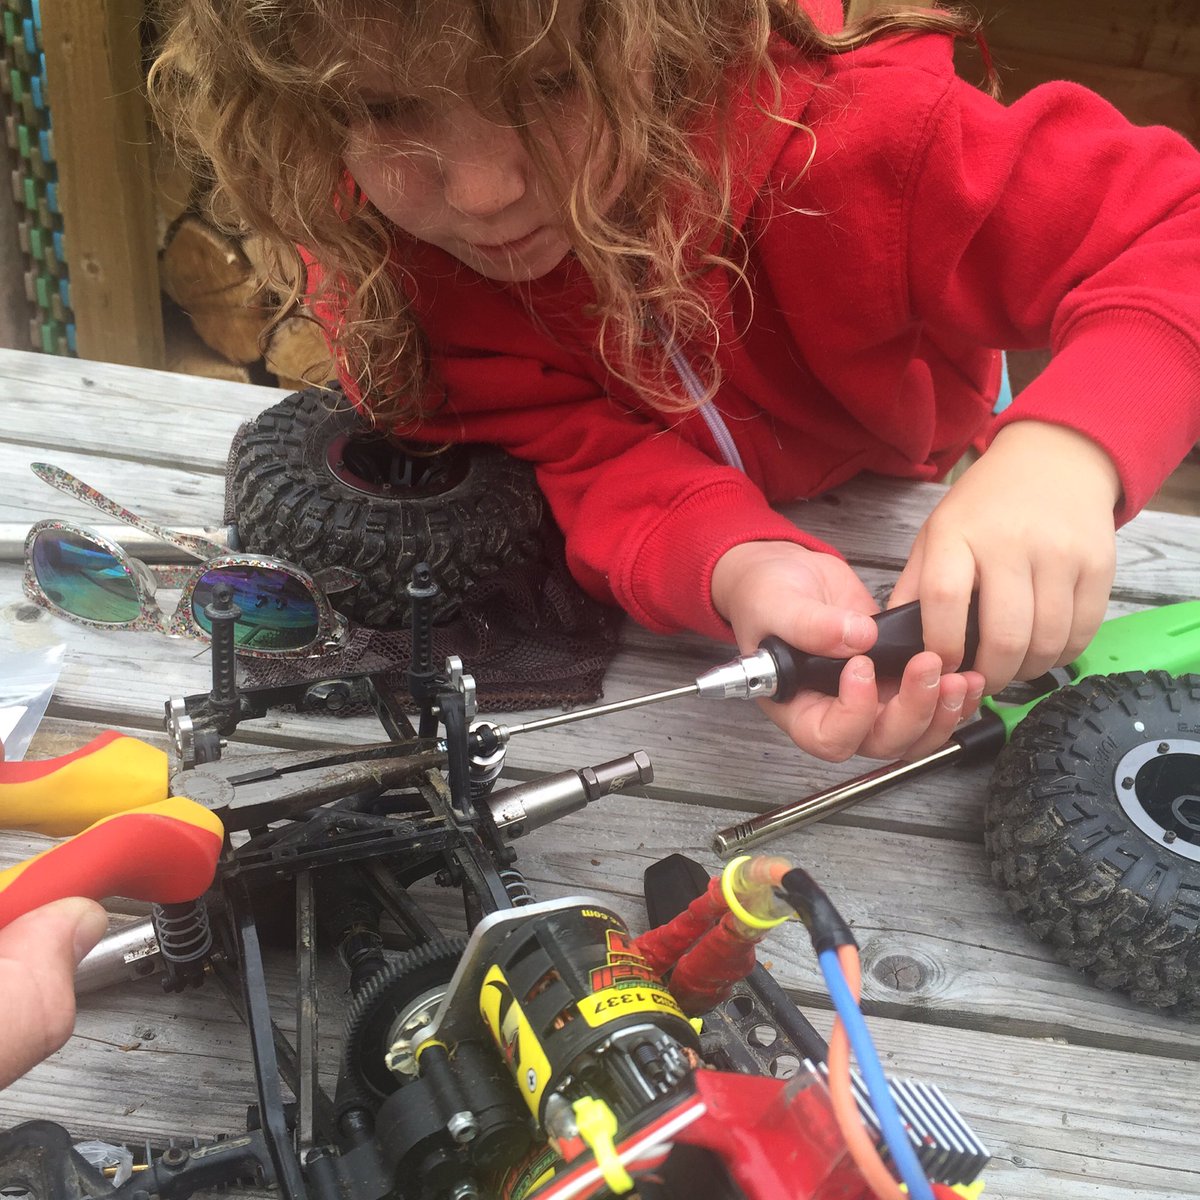 Miss putting new shocks on the #axial  #scx10 #rc #kidmakers